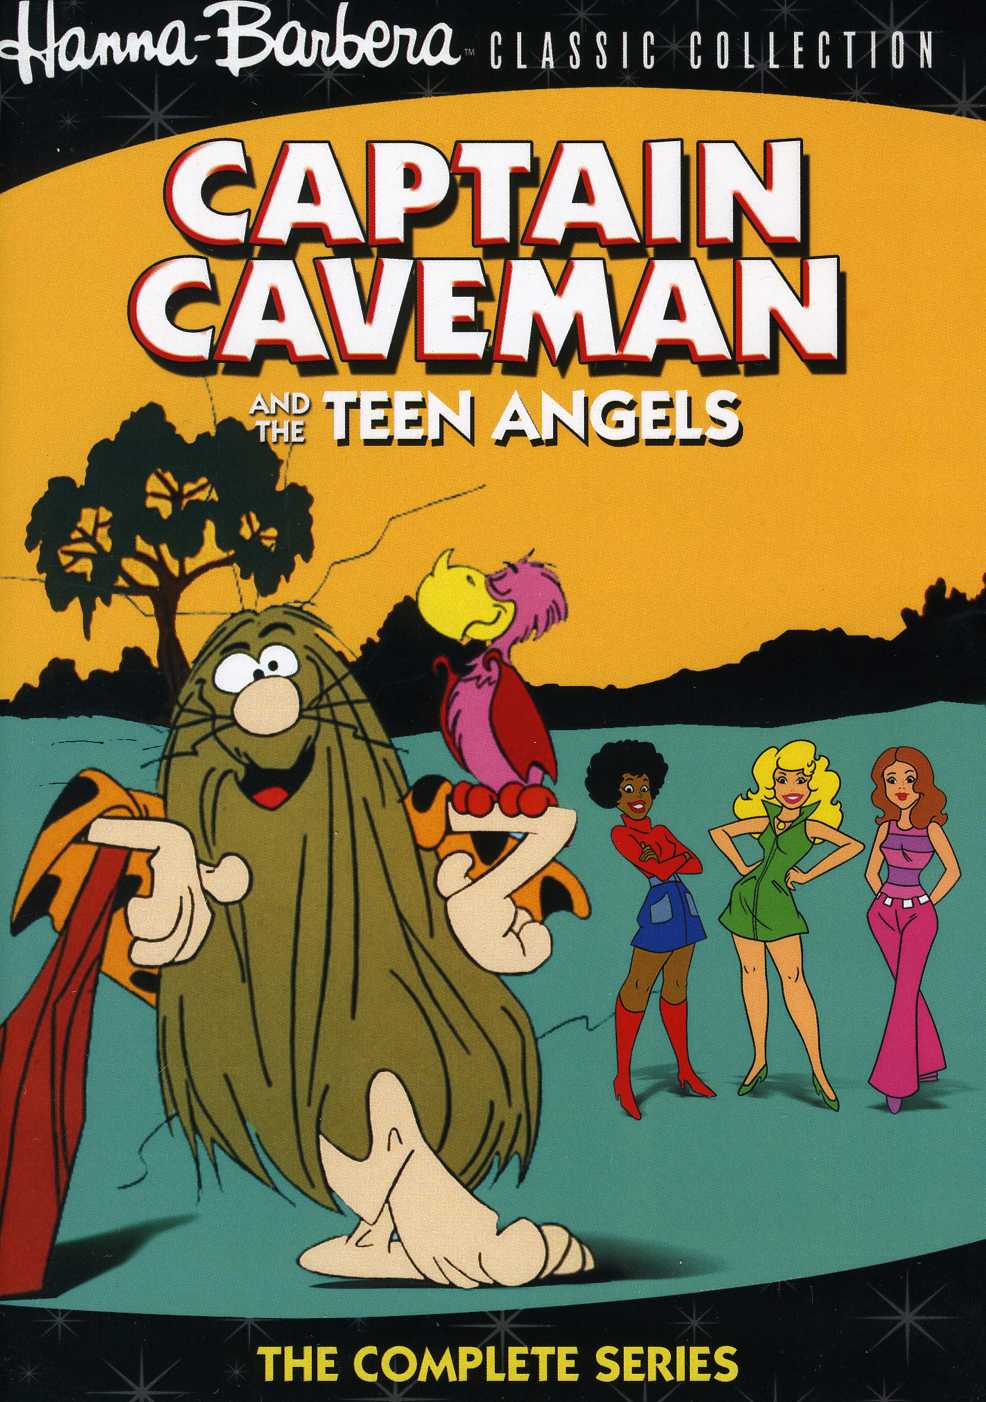 CAPTAIN CAVEMAN & THE TEEN ANGELS: COMPLETE SERIES